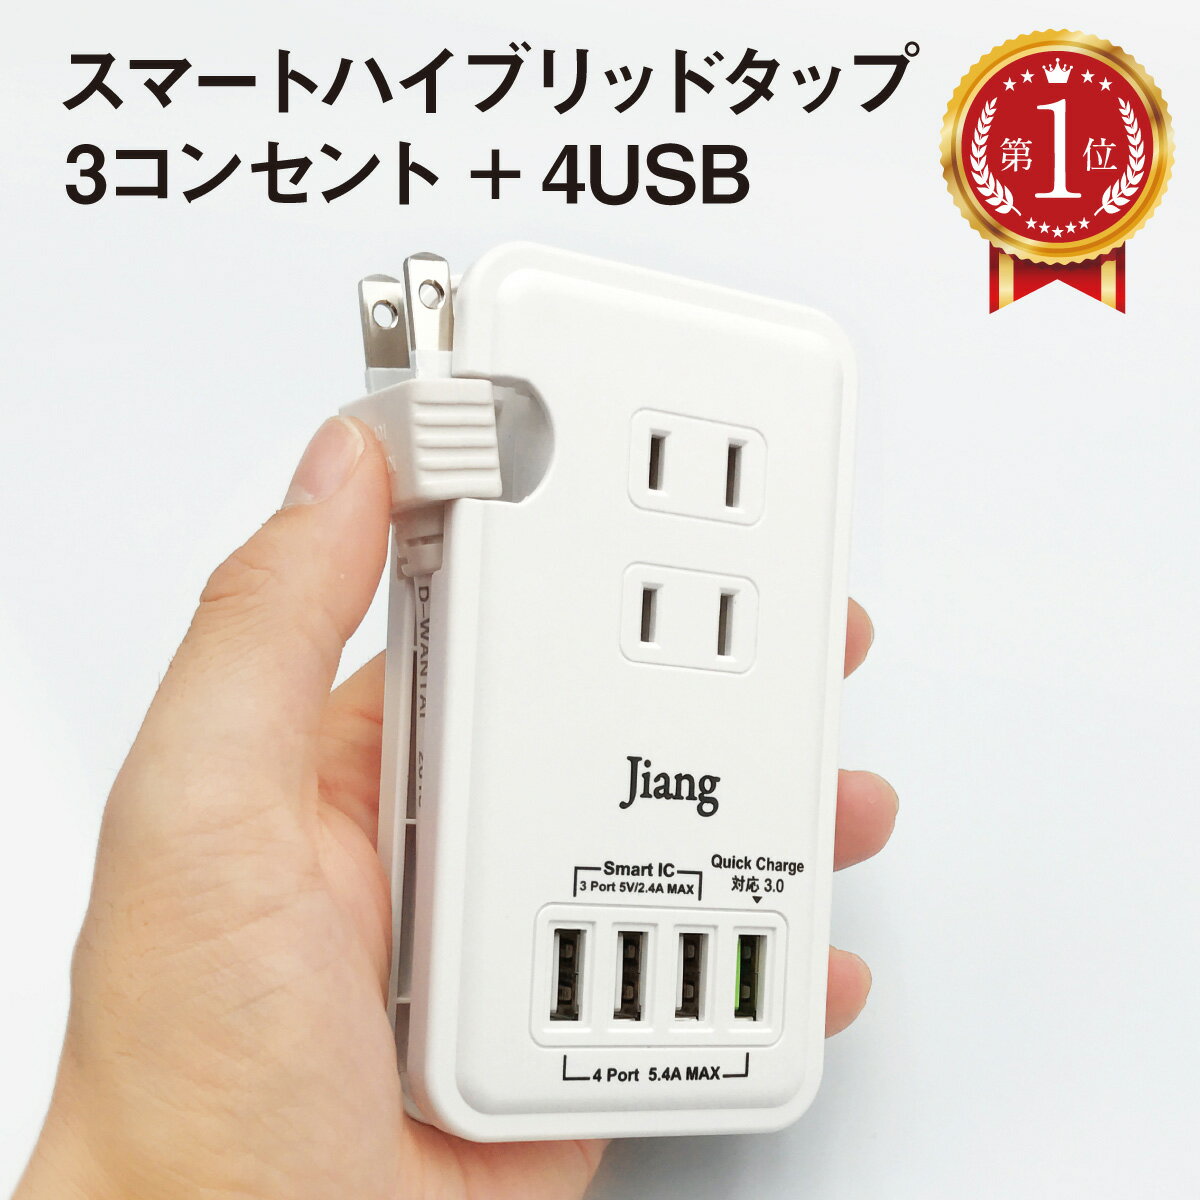 ACץ USB ® ACץ ޡȥå 󥻥 å 4ݡ usb 4 5.4A Ŵ 㡼㡼 USBŴ 󥻥 3 1400W Ÿå  Ʊ ץ USBå USBץ ޥ۽Ŵ Quick Charger 3.0Aб jiang-tap01פ򸫤